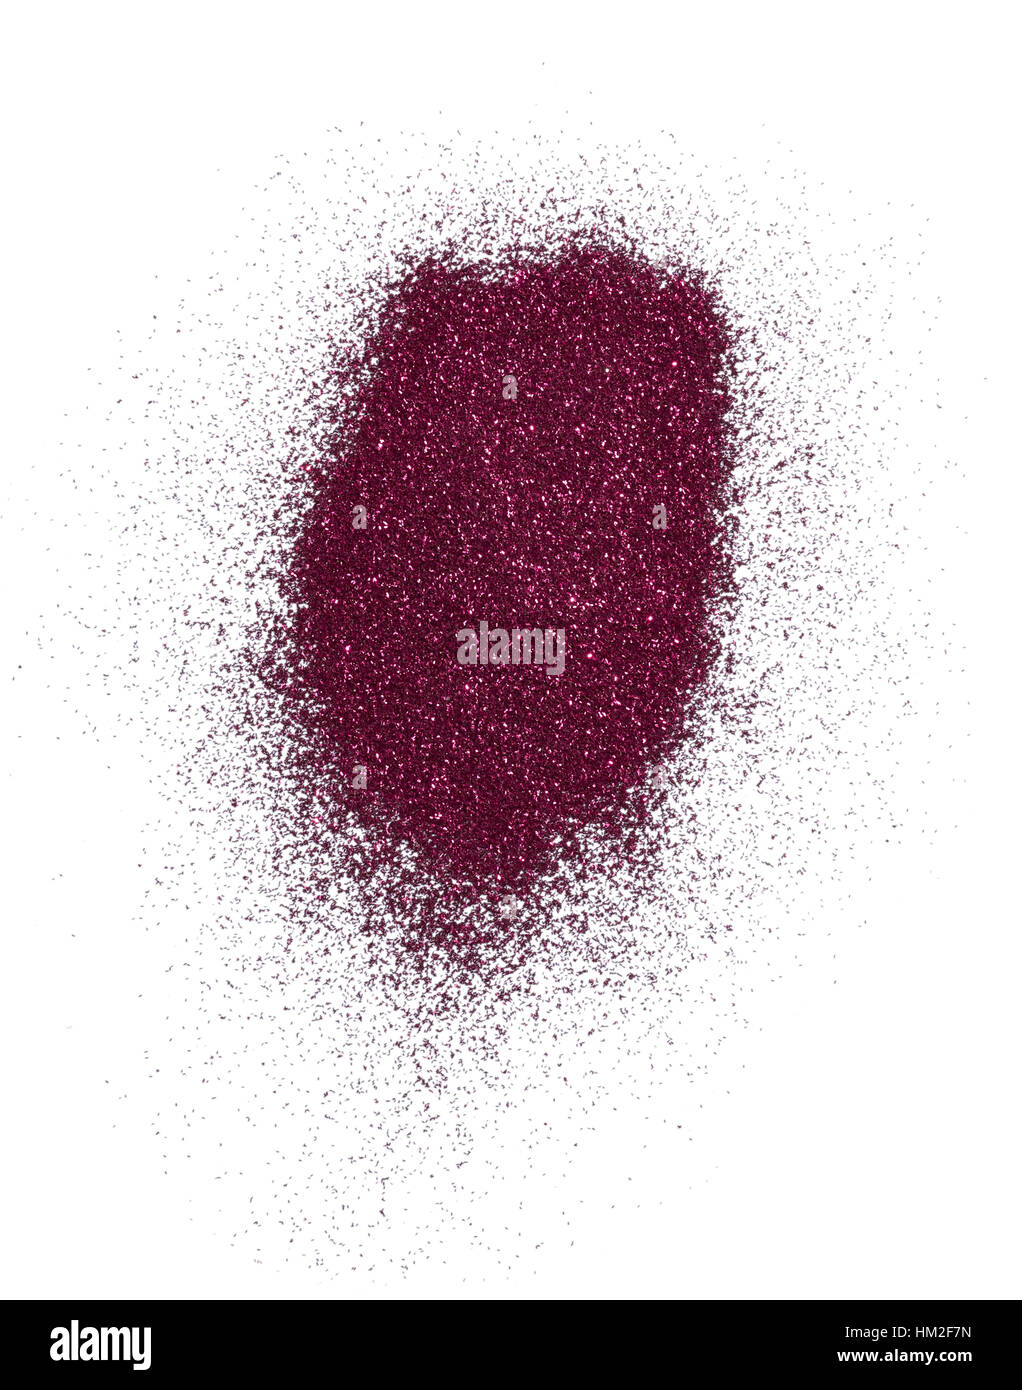 A cut out beauty image of a sample of metallic pink dust or glitter powder. Stock Photo